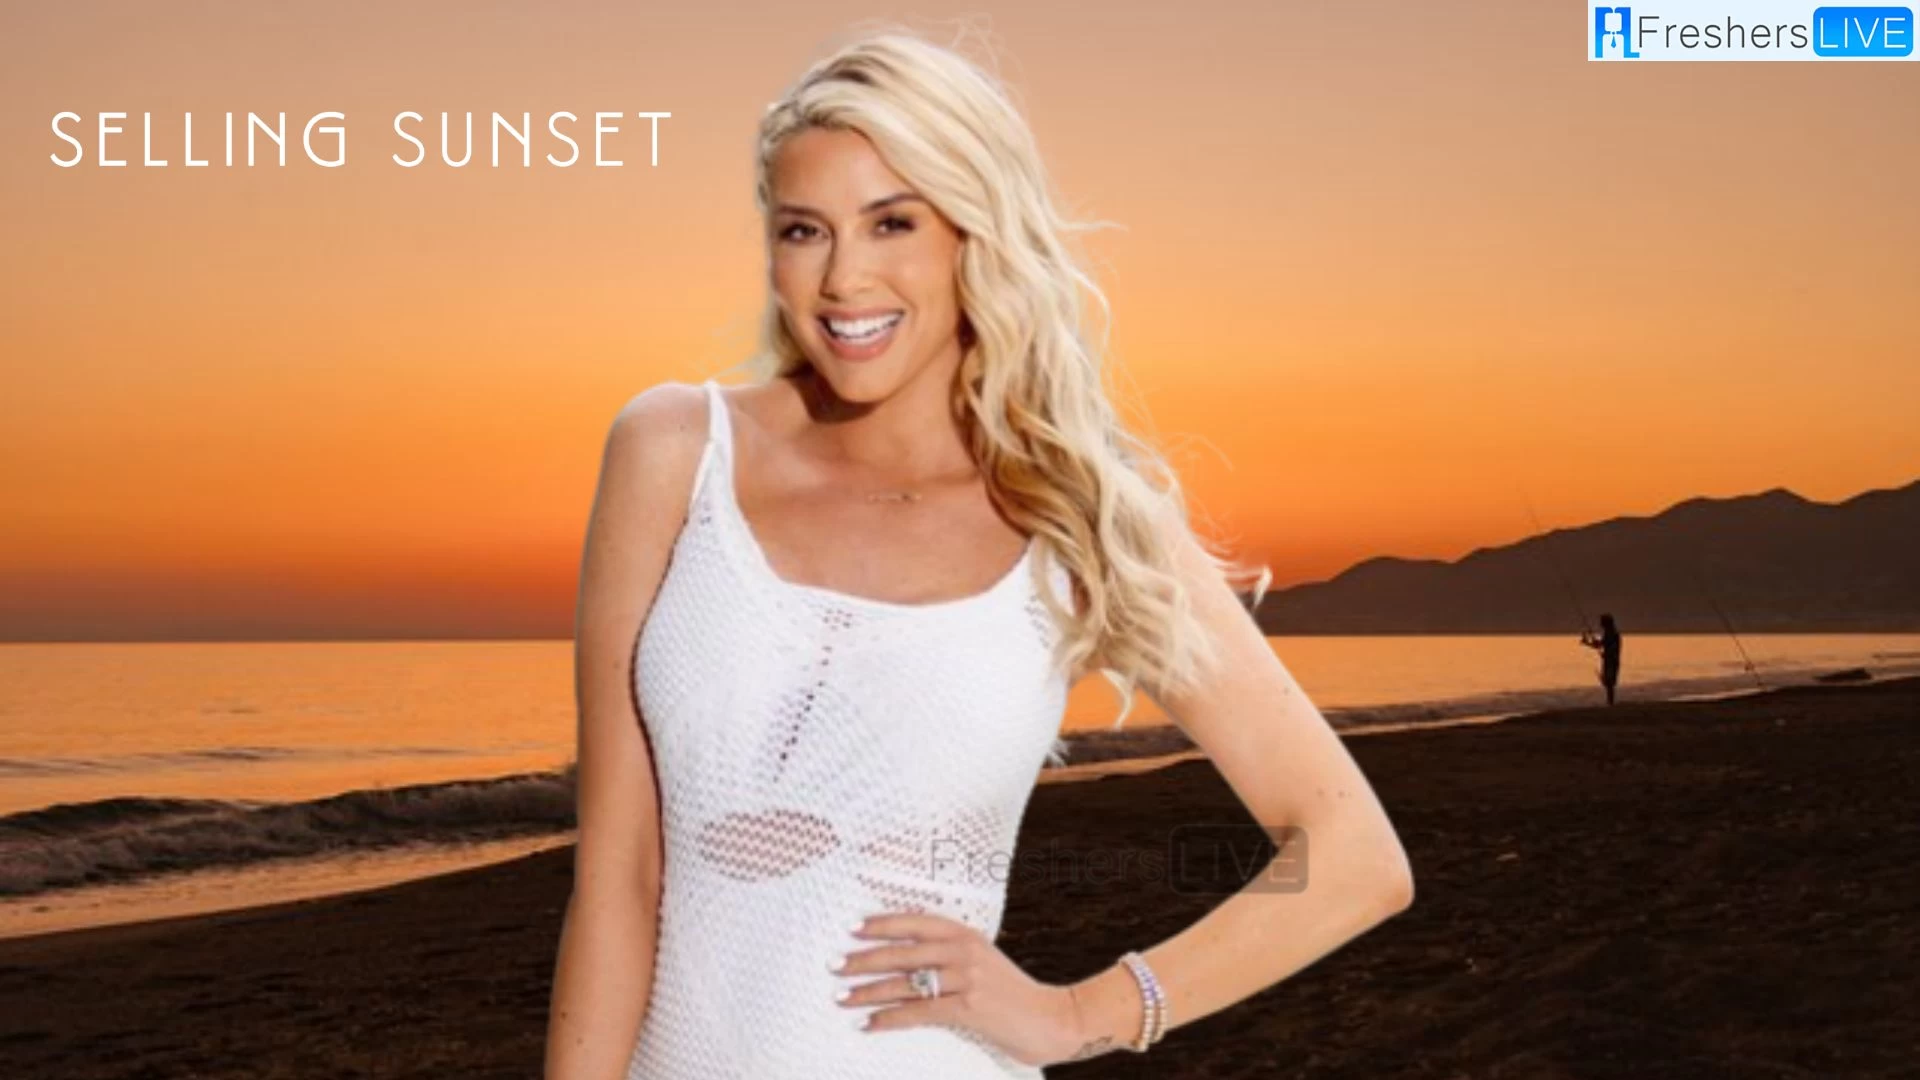 Why is Heather Not In Season 7 Selling Sunset?